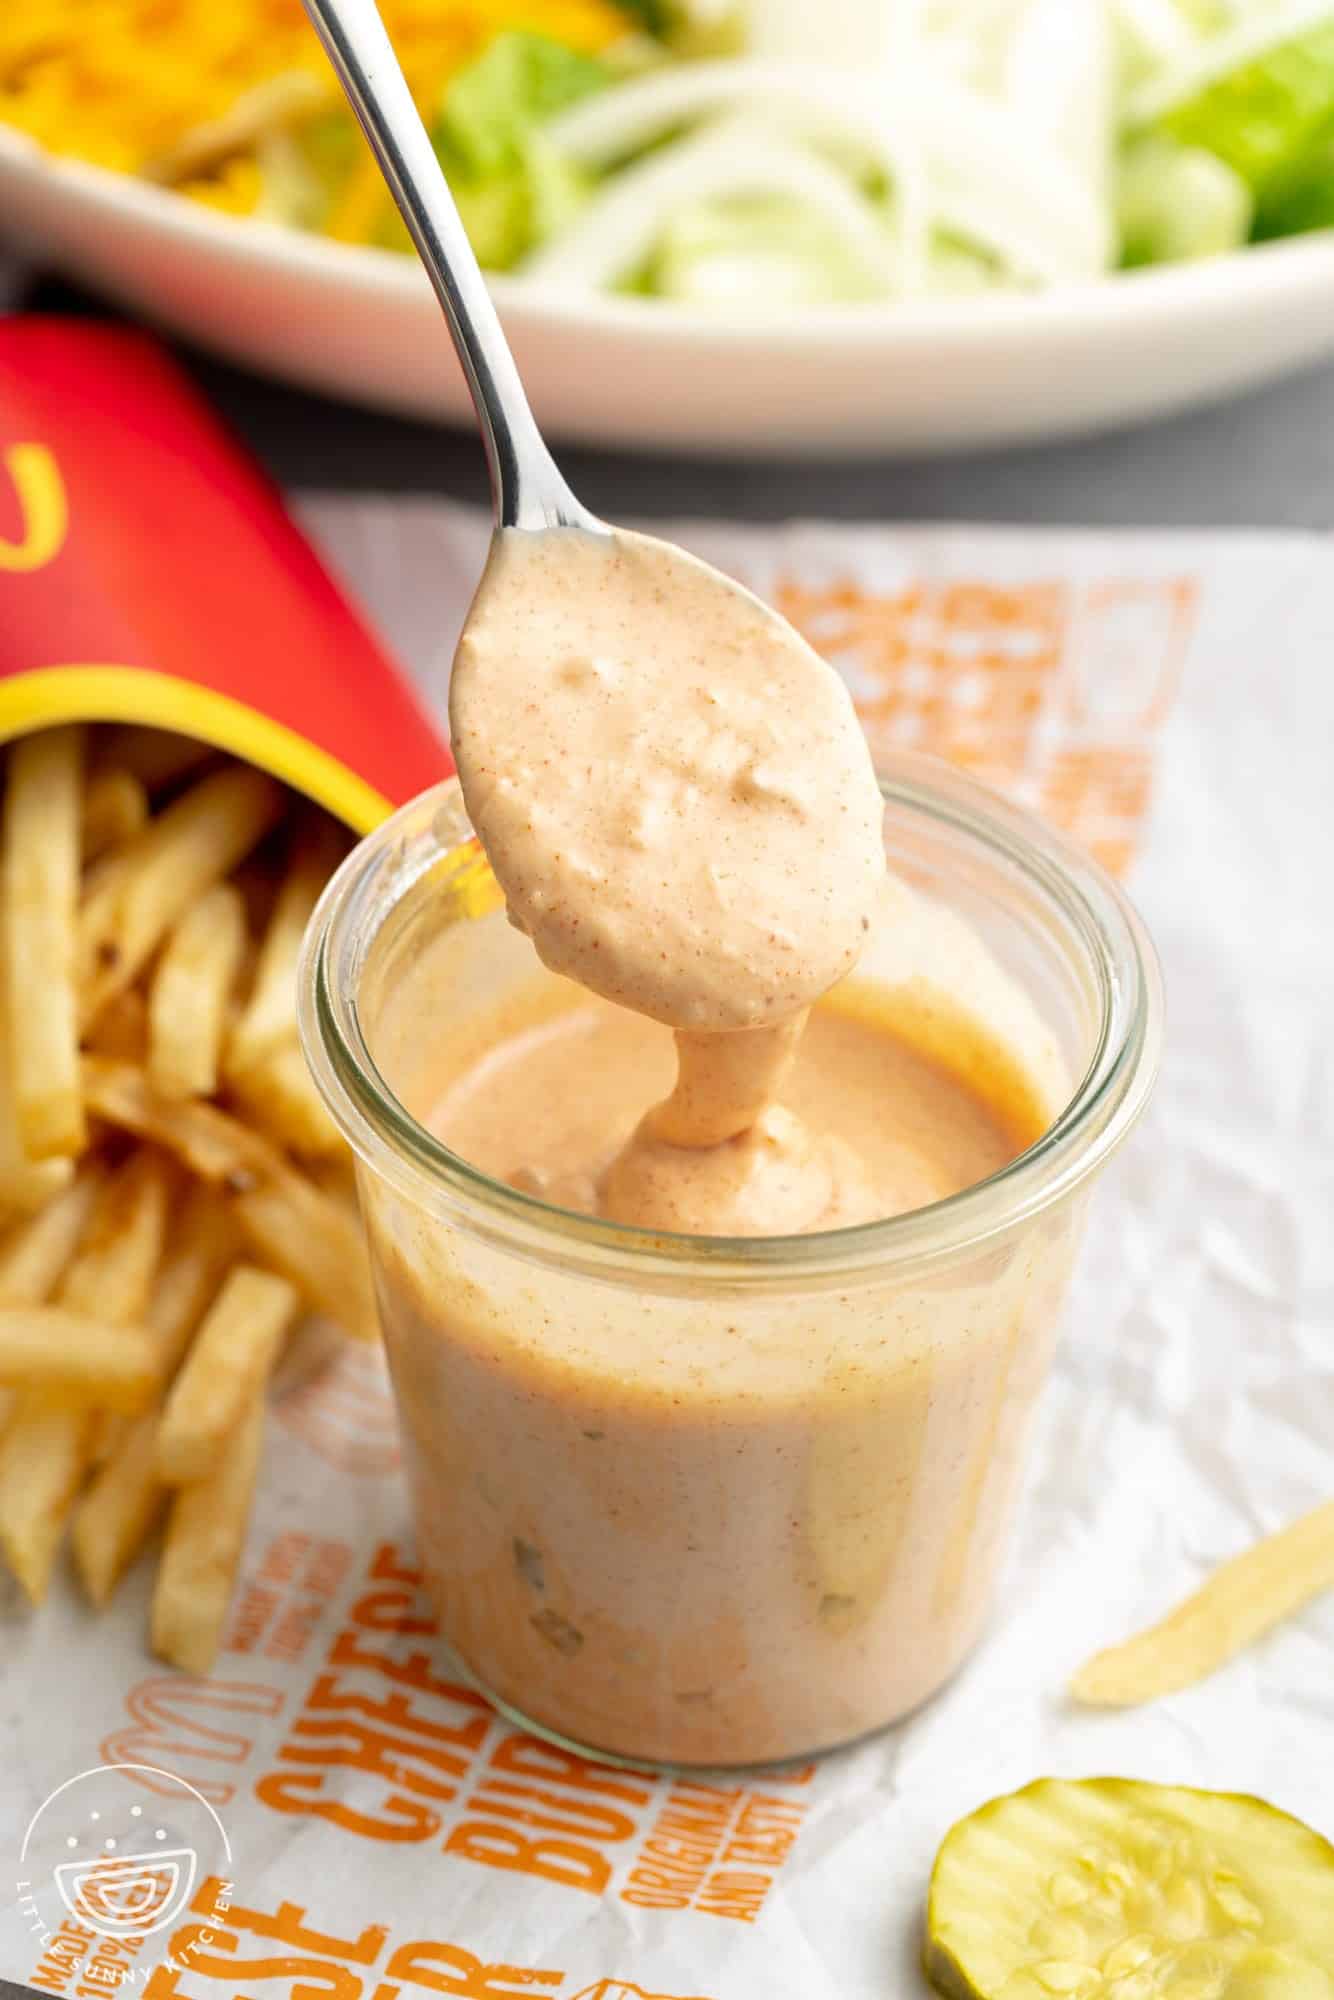 Copycat Big Mac sauce in a jar with a spoon, with fries and a salad in the background